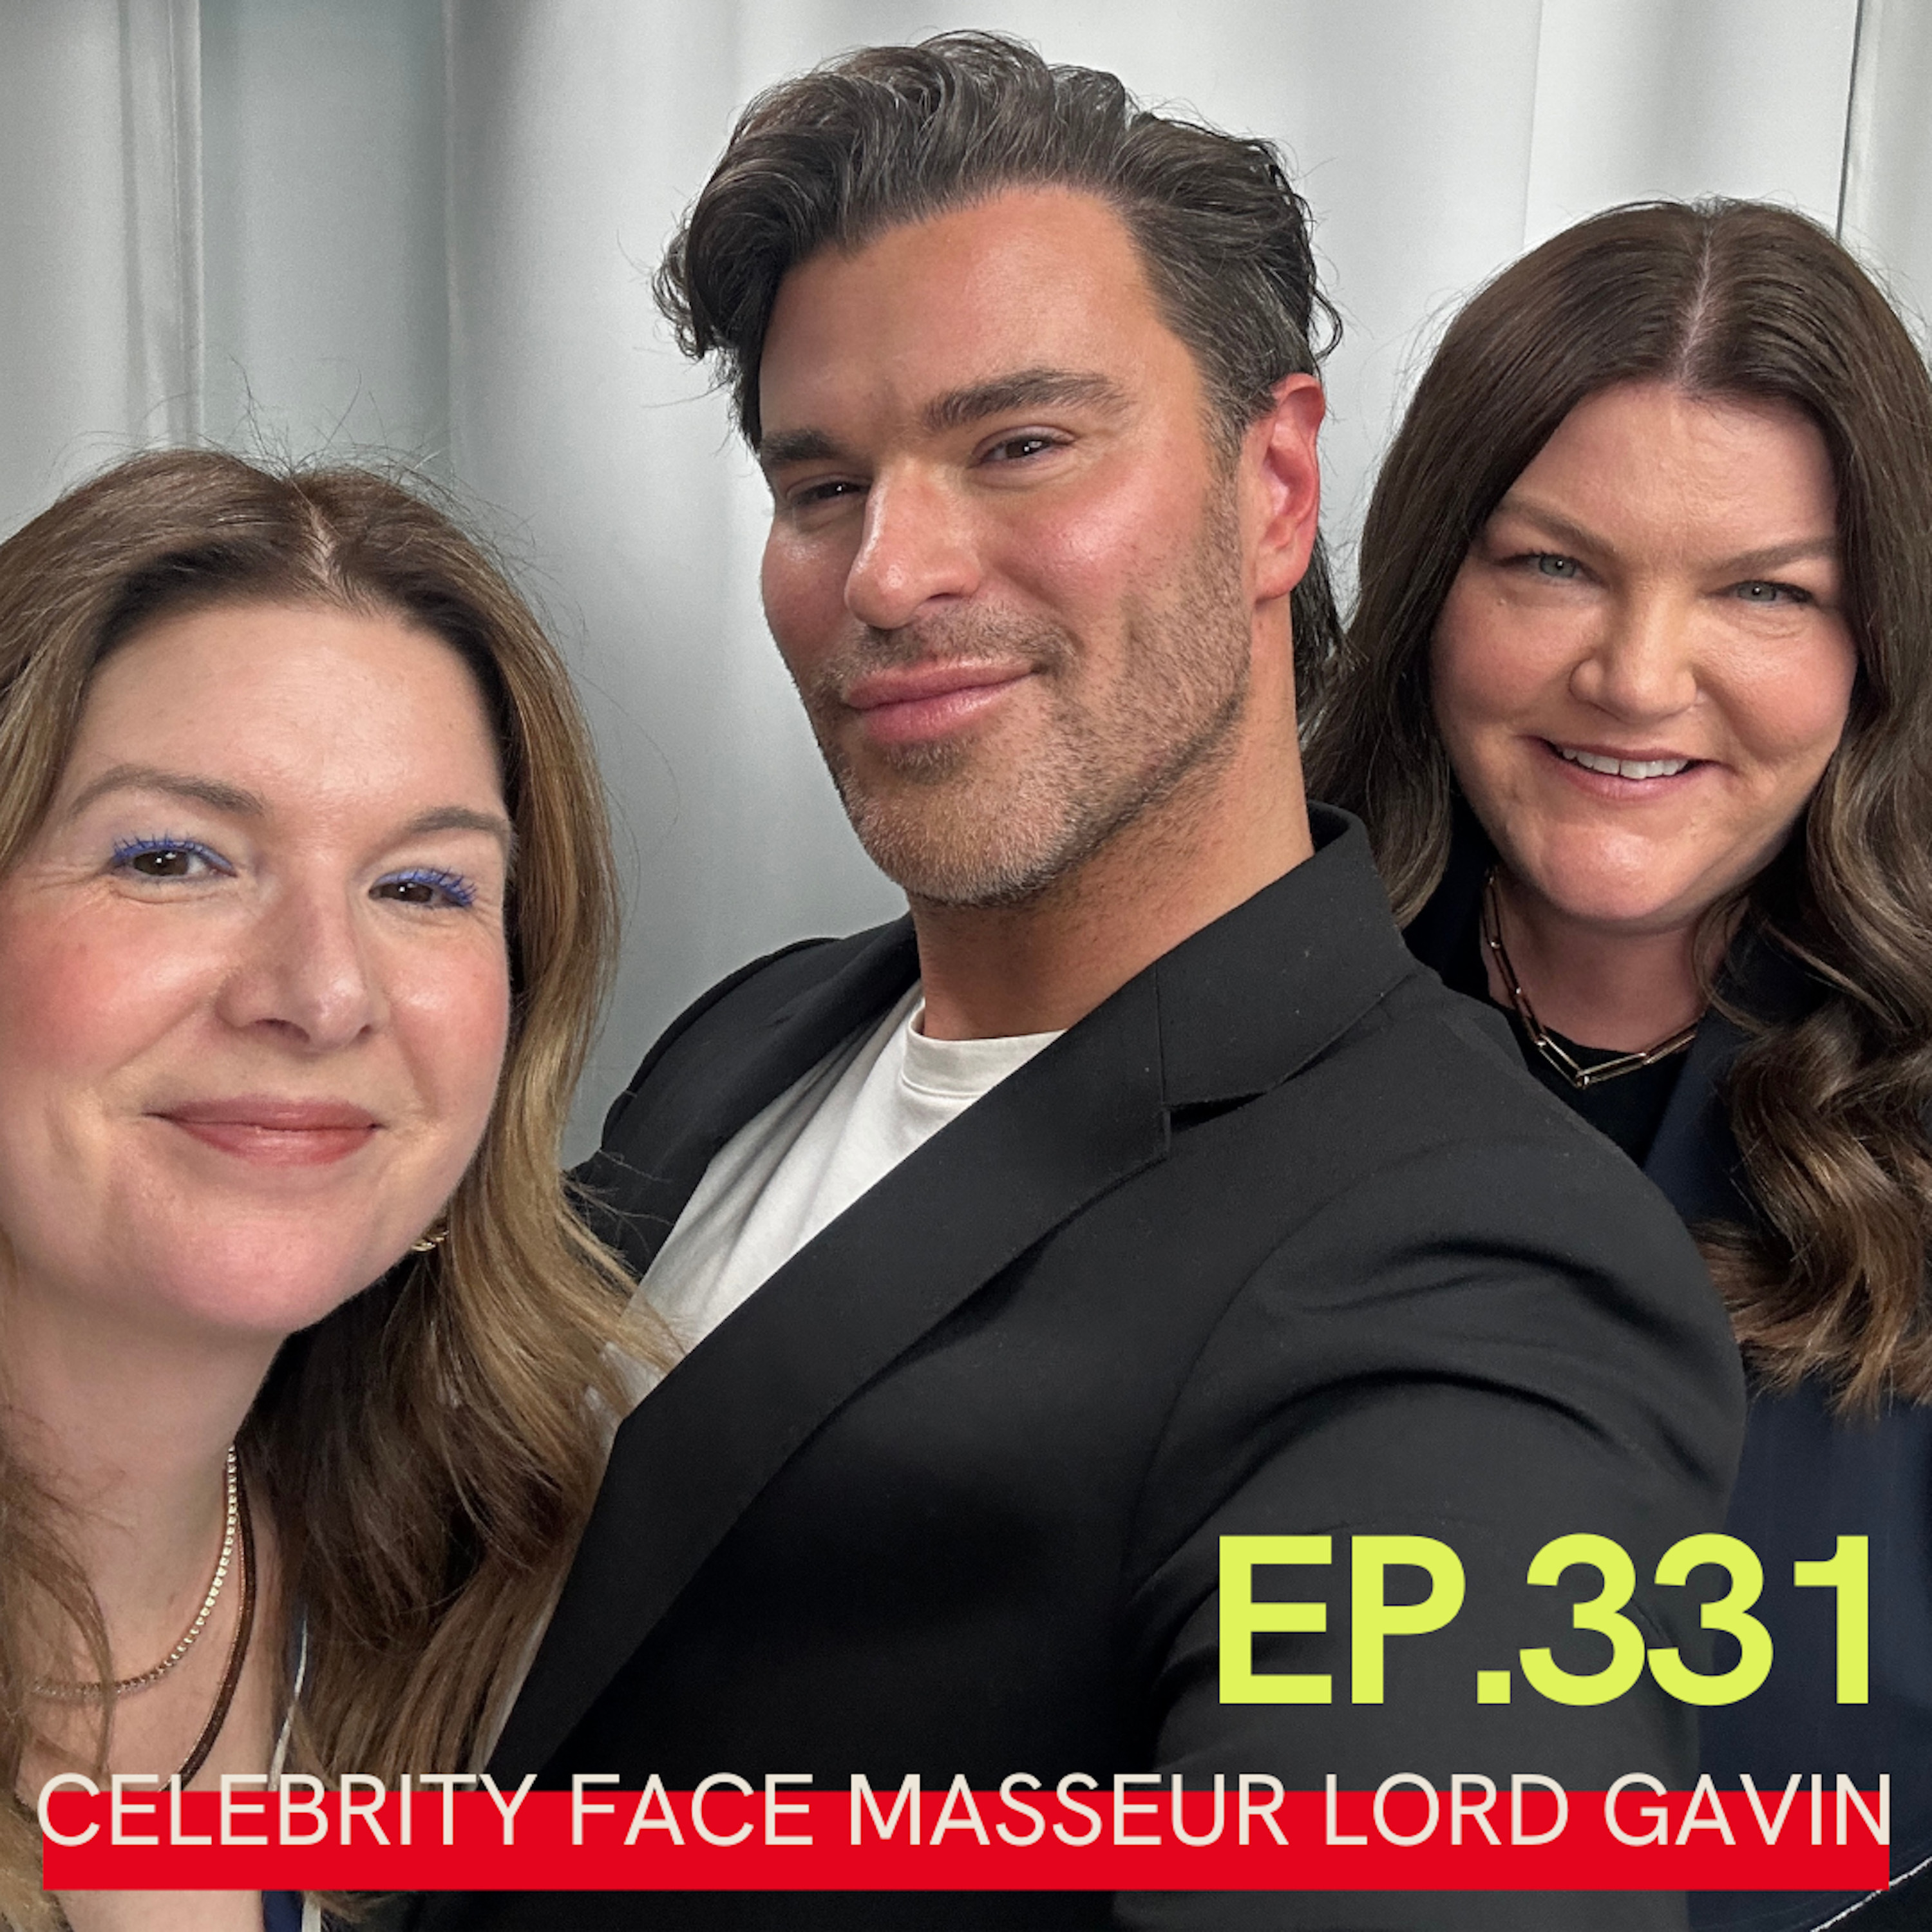 Meet Lord Gavin, The Facial Masseur Responsible For Making A-List Stars Look Snatched For The MET Gala. Plus, His Red Carpet Meditations and The Real-Life (Braveheart-Adjacent!?) Family History That Y